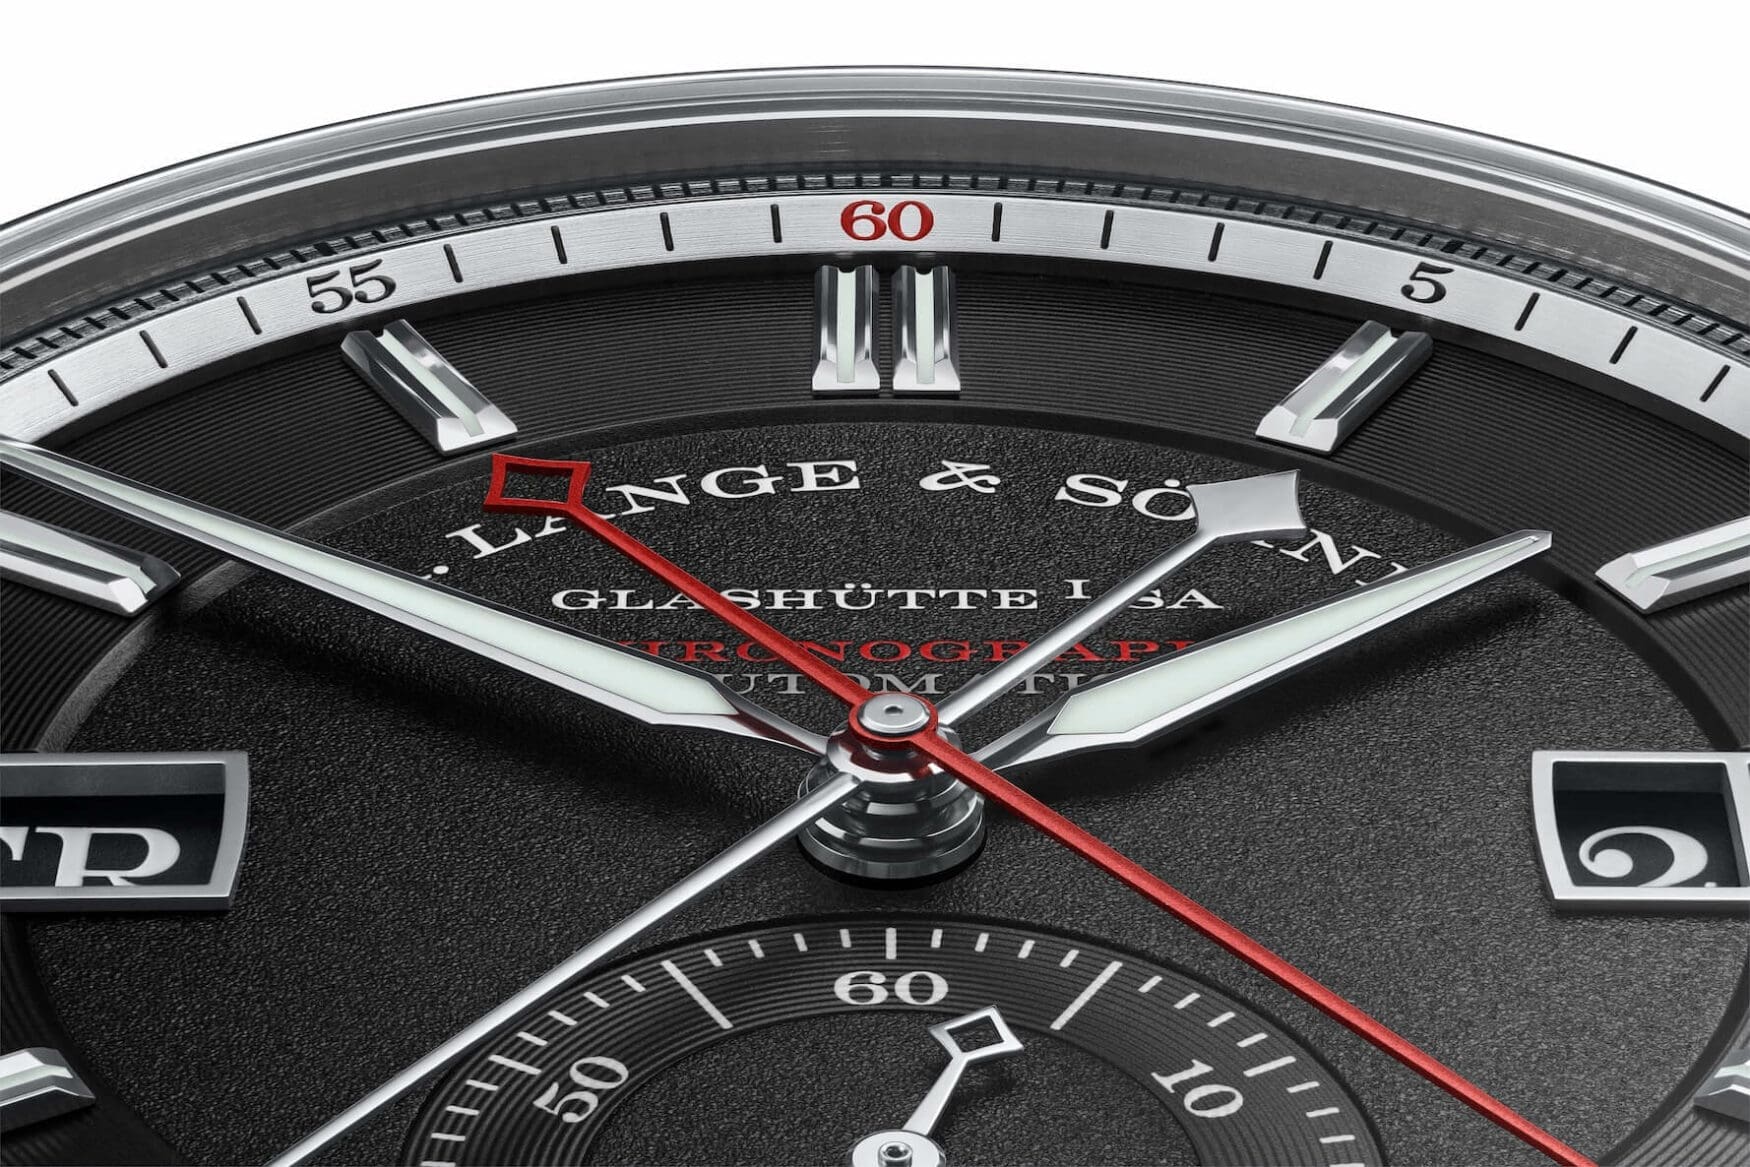 The new Odysseus Chronograph is the first-ever automatic chronograph from A. Lange & Söhne